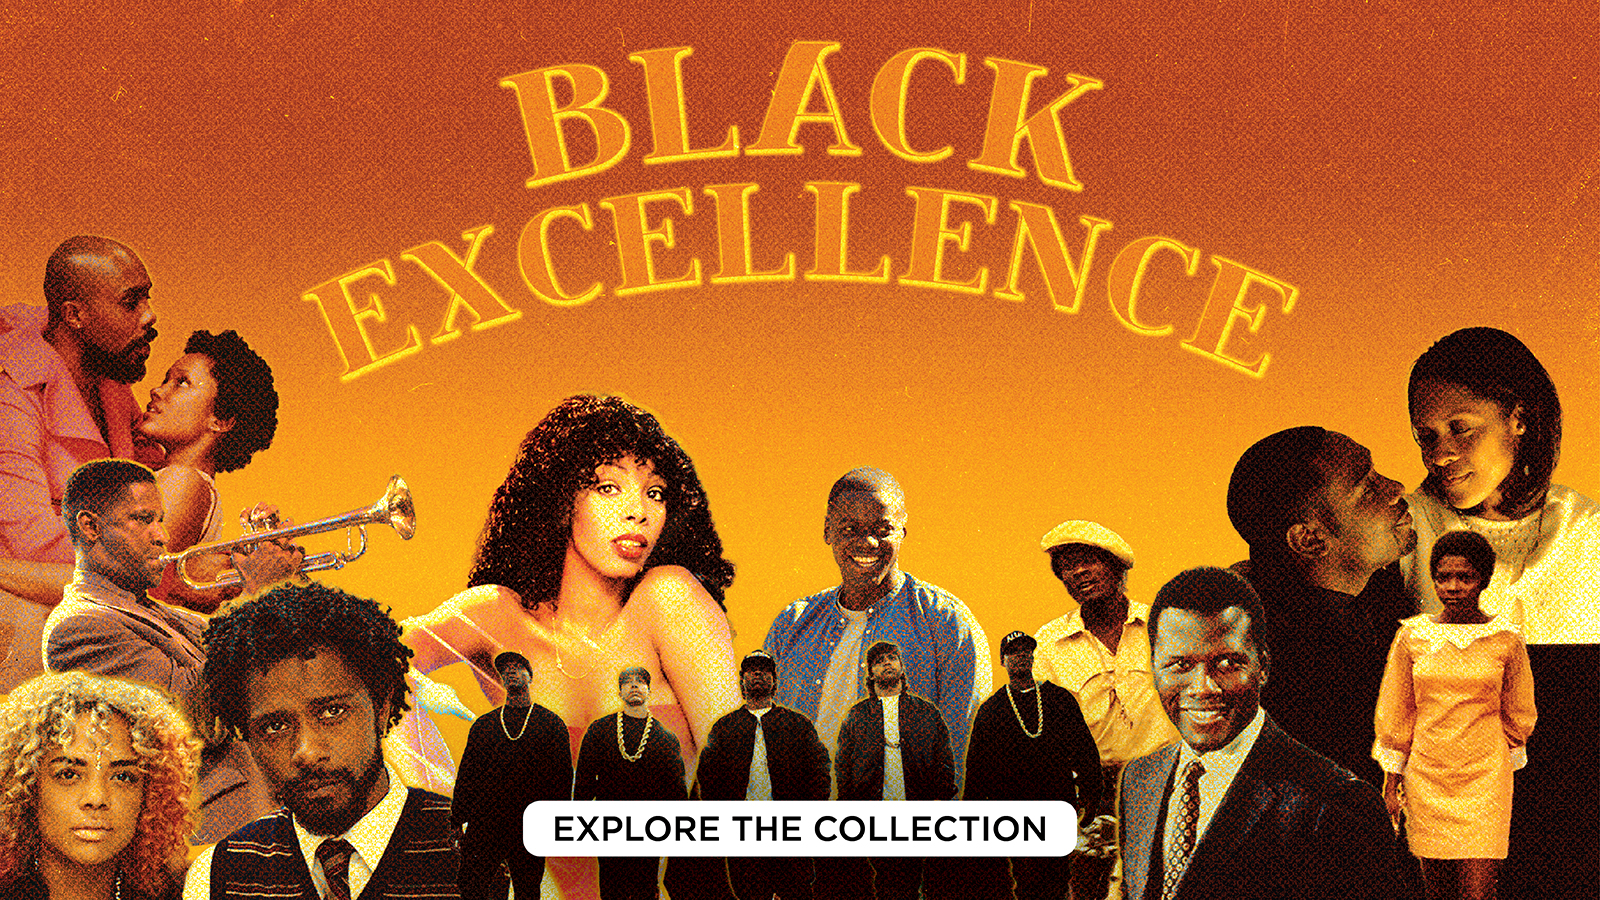 Black Excellence - Explore the Collection